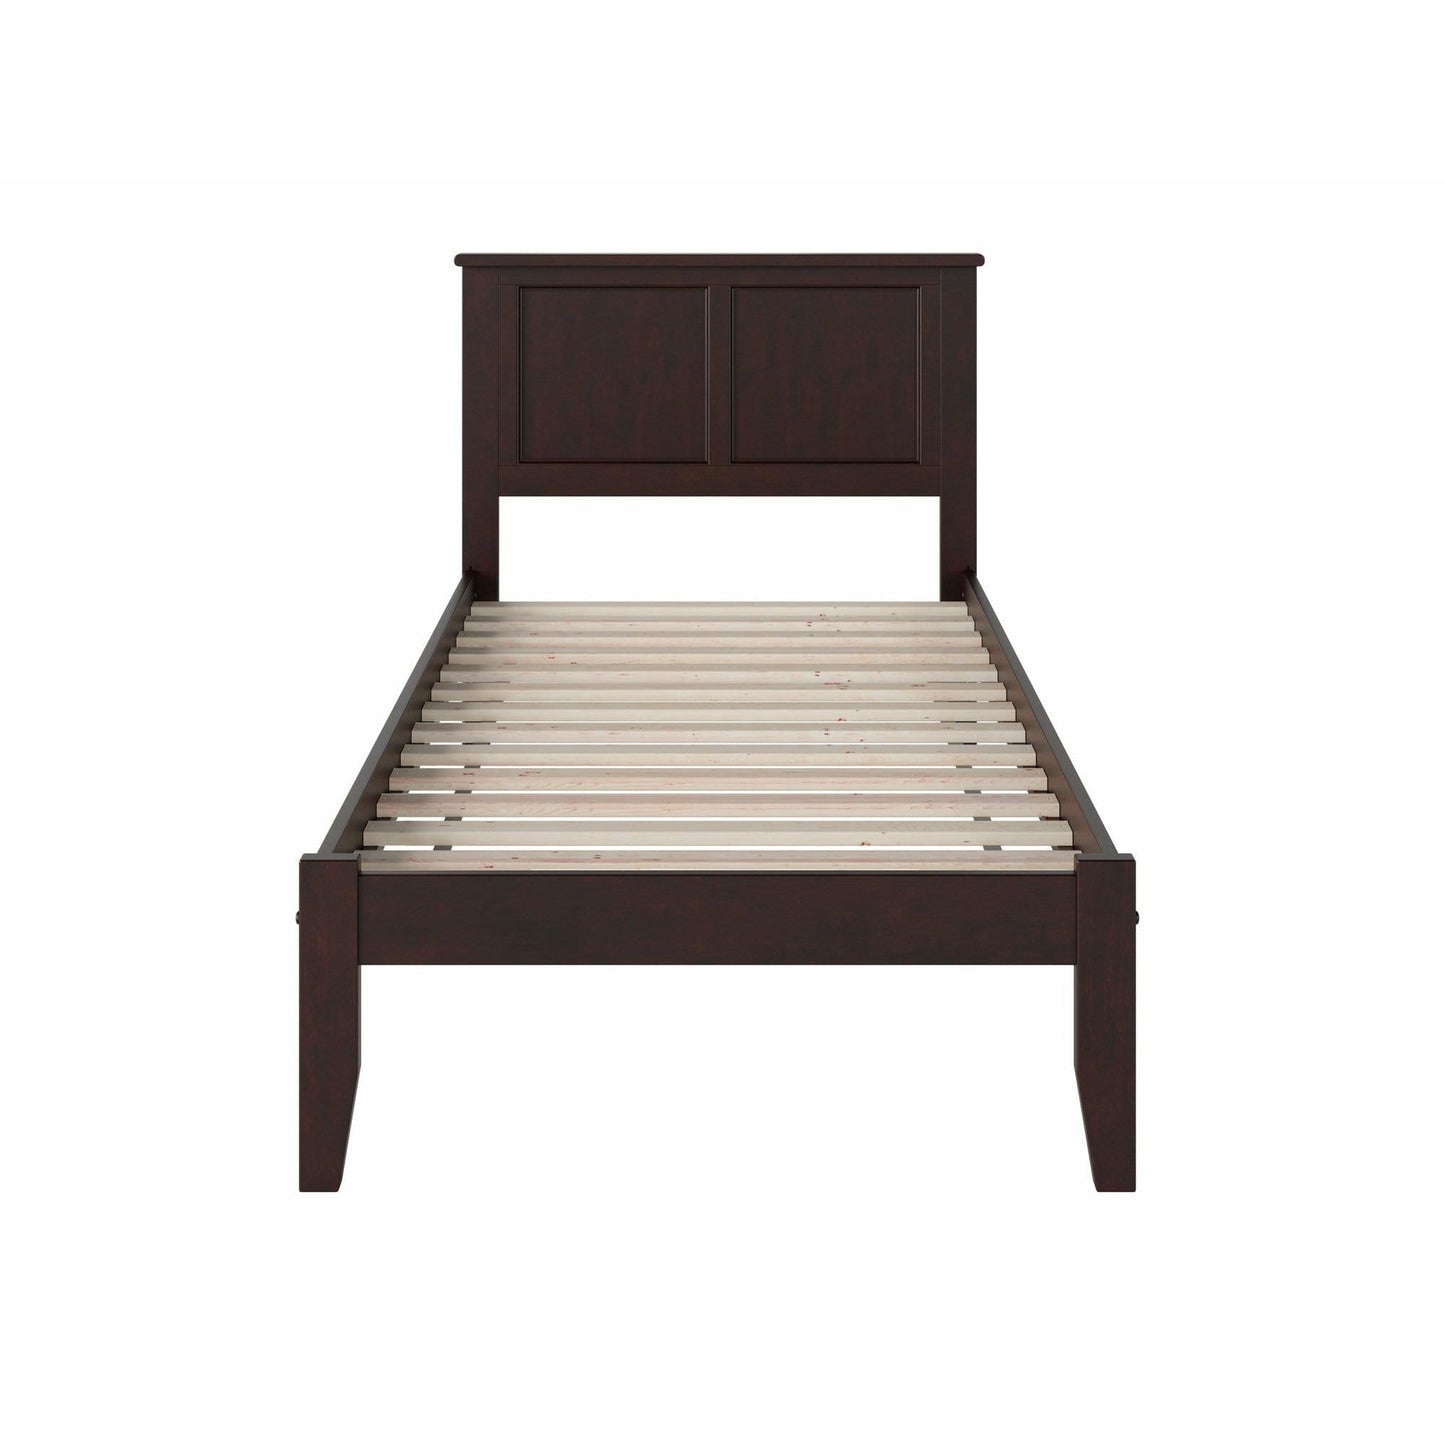 Atlantic Furniture Bed Madison Twin XL Platform Bed with Open Foot Board in Espresso